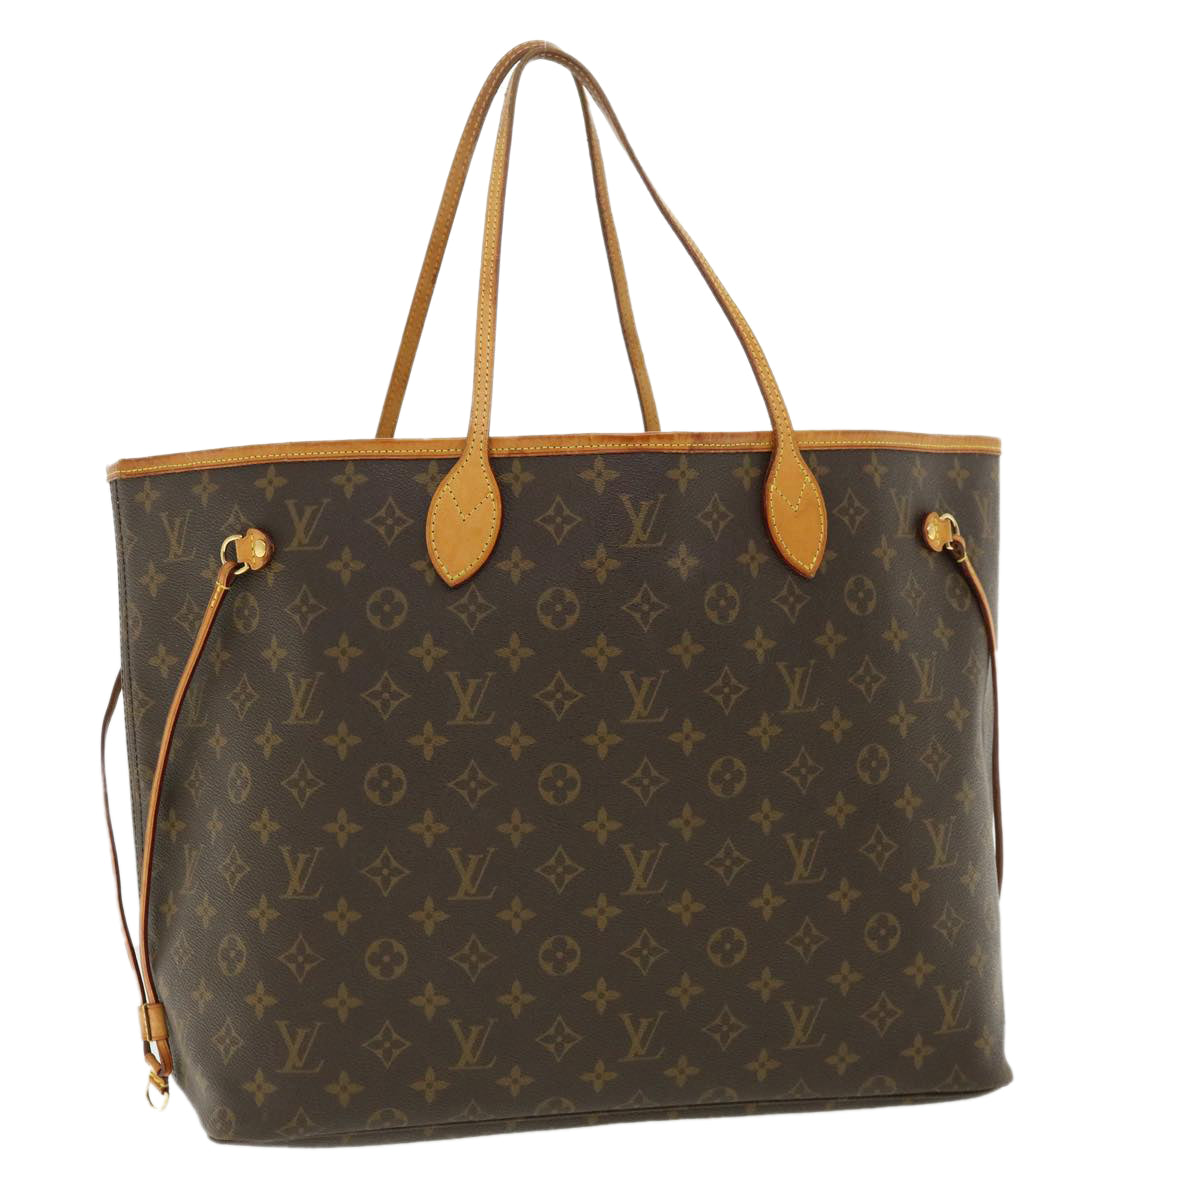 Shop Louis Vuitton NEVERFULL Unisex Leather Elegant Style Shoulder Bags  (M46786) by からんからん